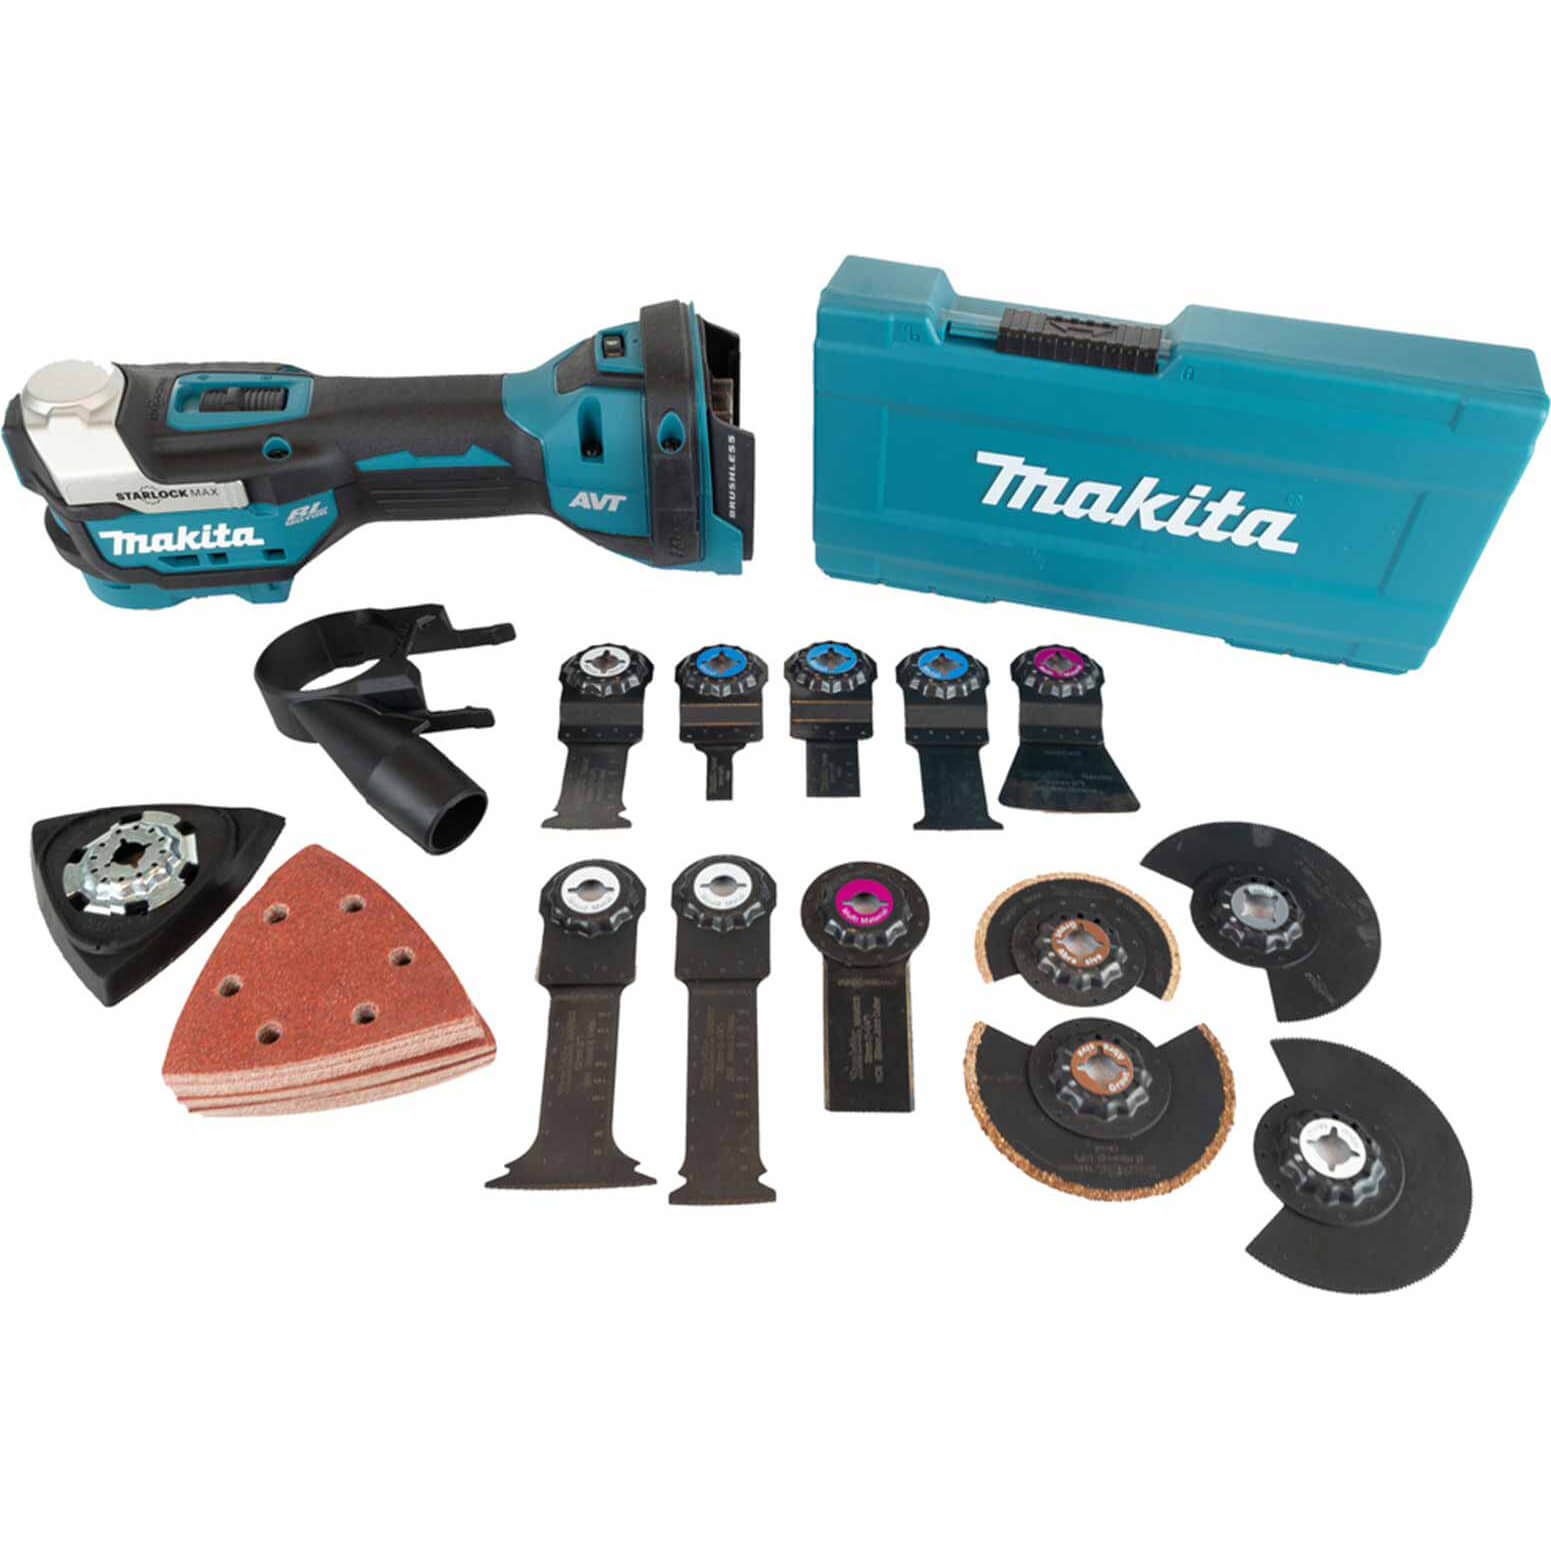 Makita DTM52 18v LXT Cordless Brushless Oscillating Multi Tool and Accessories No Batteries No Charger No Case